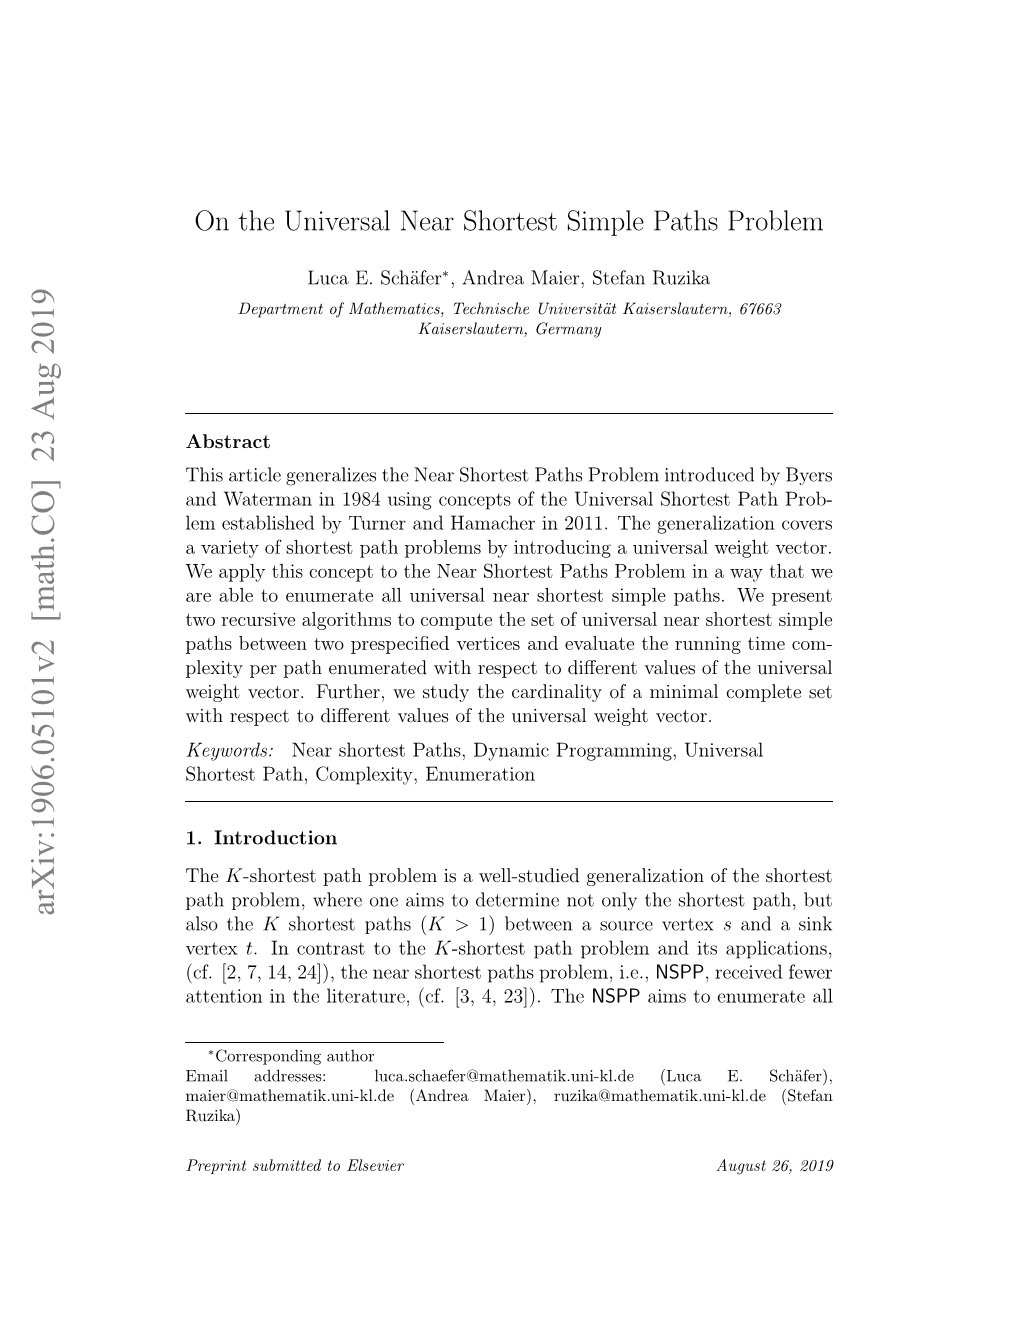 On the Universal Near Shortest Simple Paths Problem